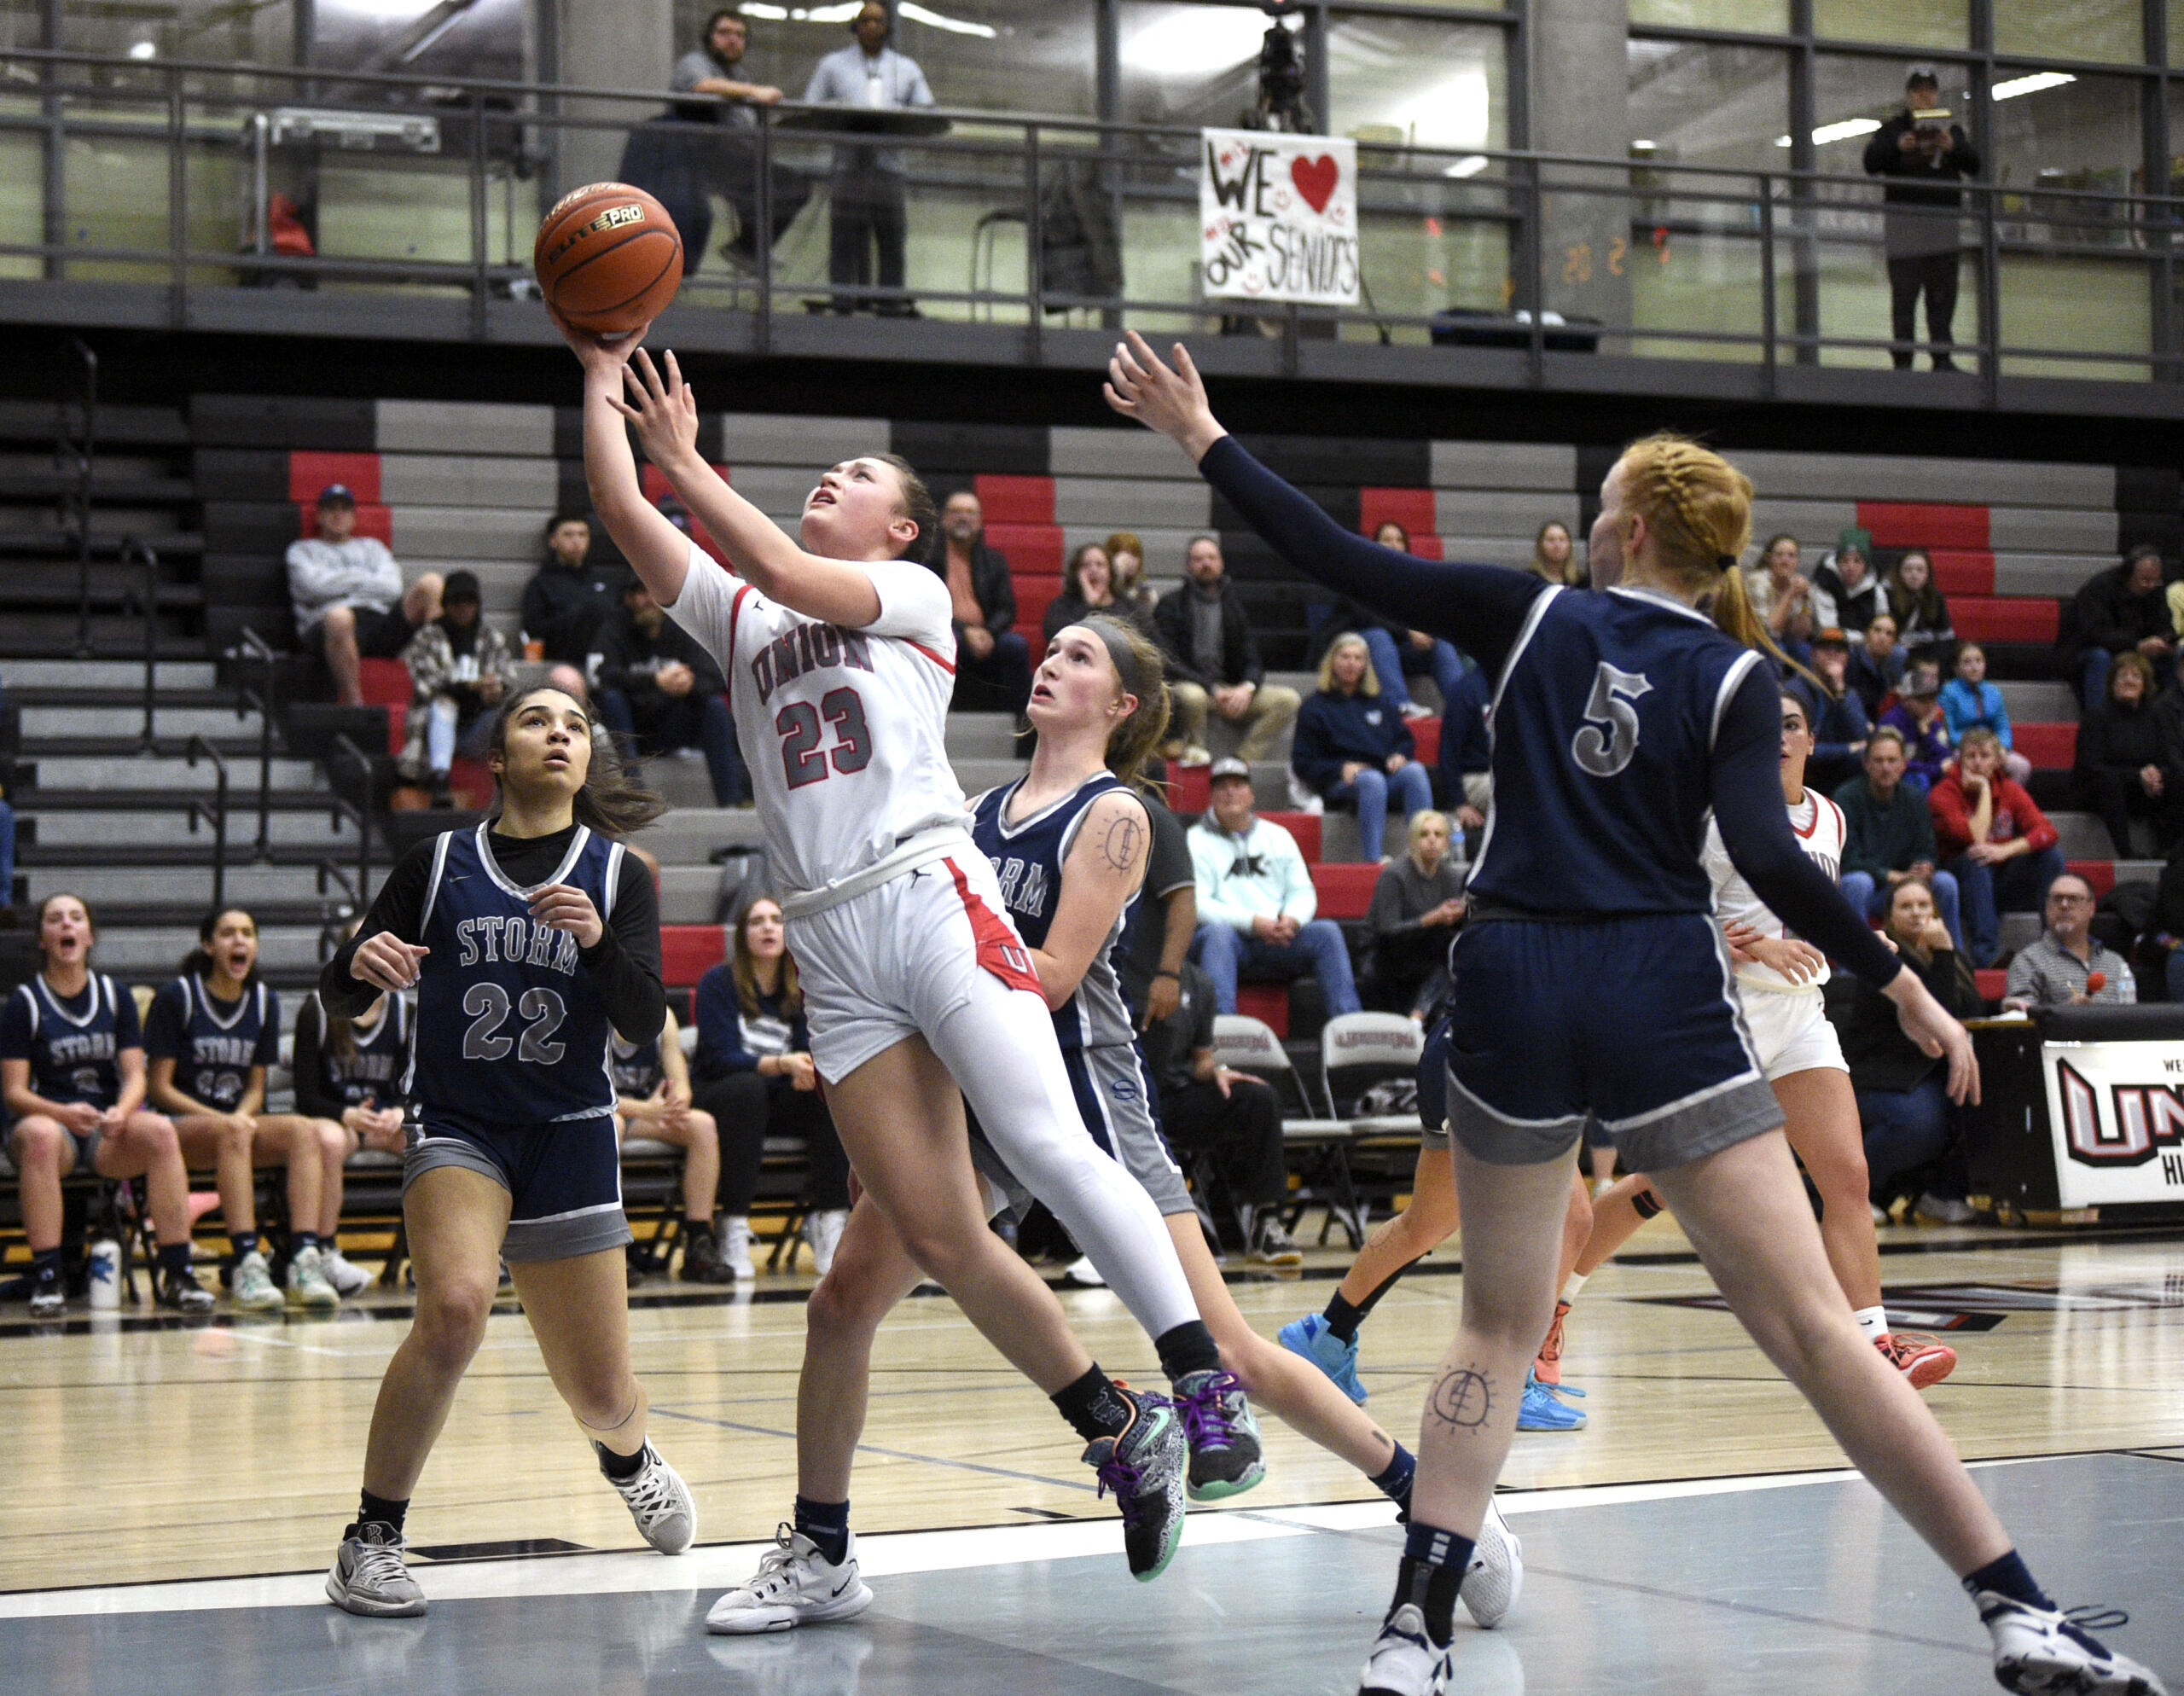 Union’s Brooklynn Haywood goes up for a shot in the paint between multiple Skyview defenders on Tuesday, Feb. 7, 2023, at Union High School.